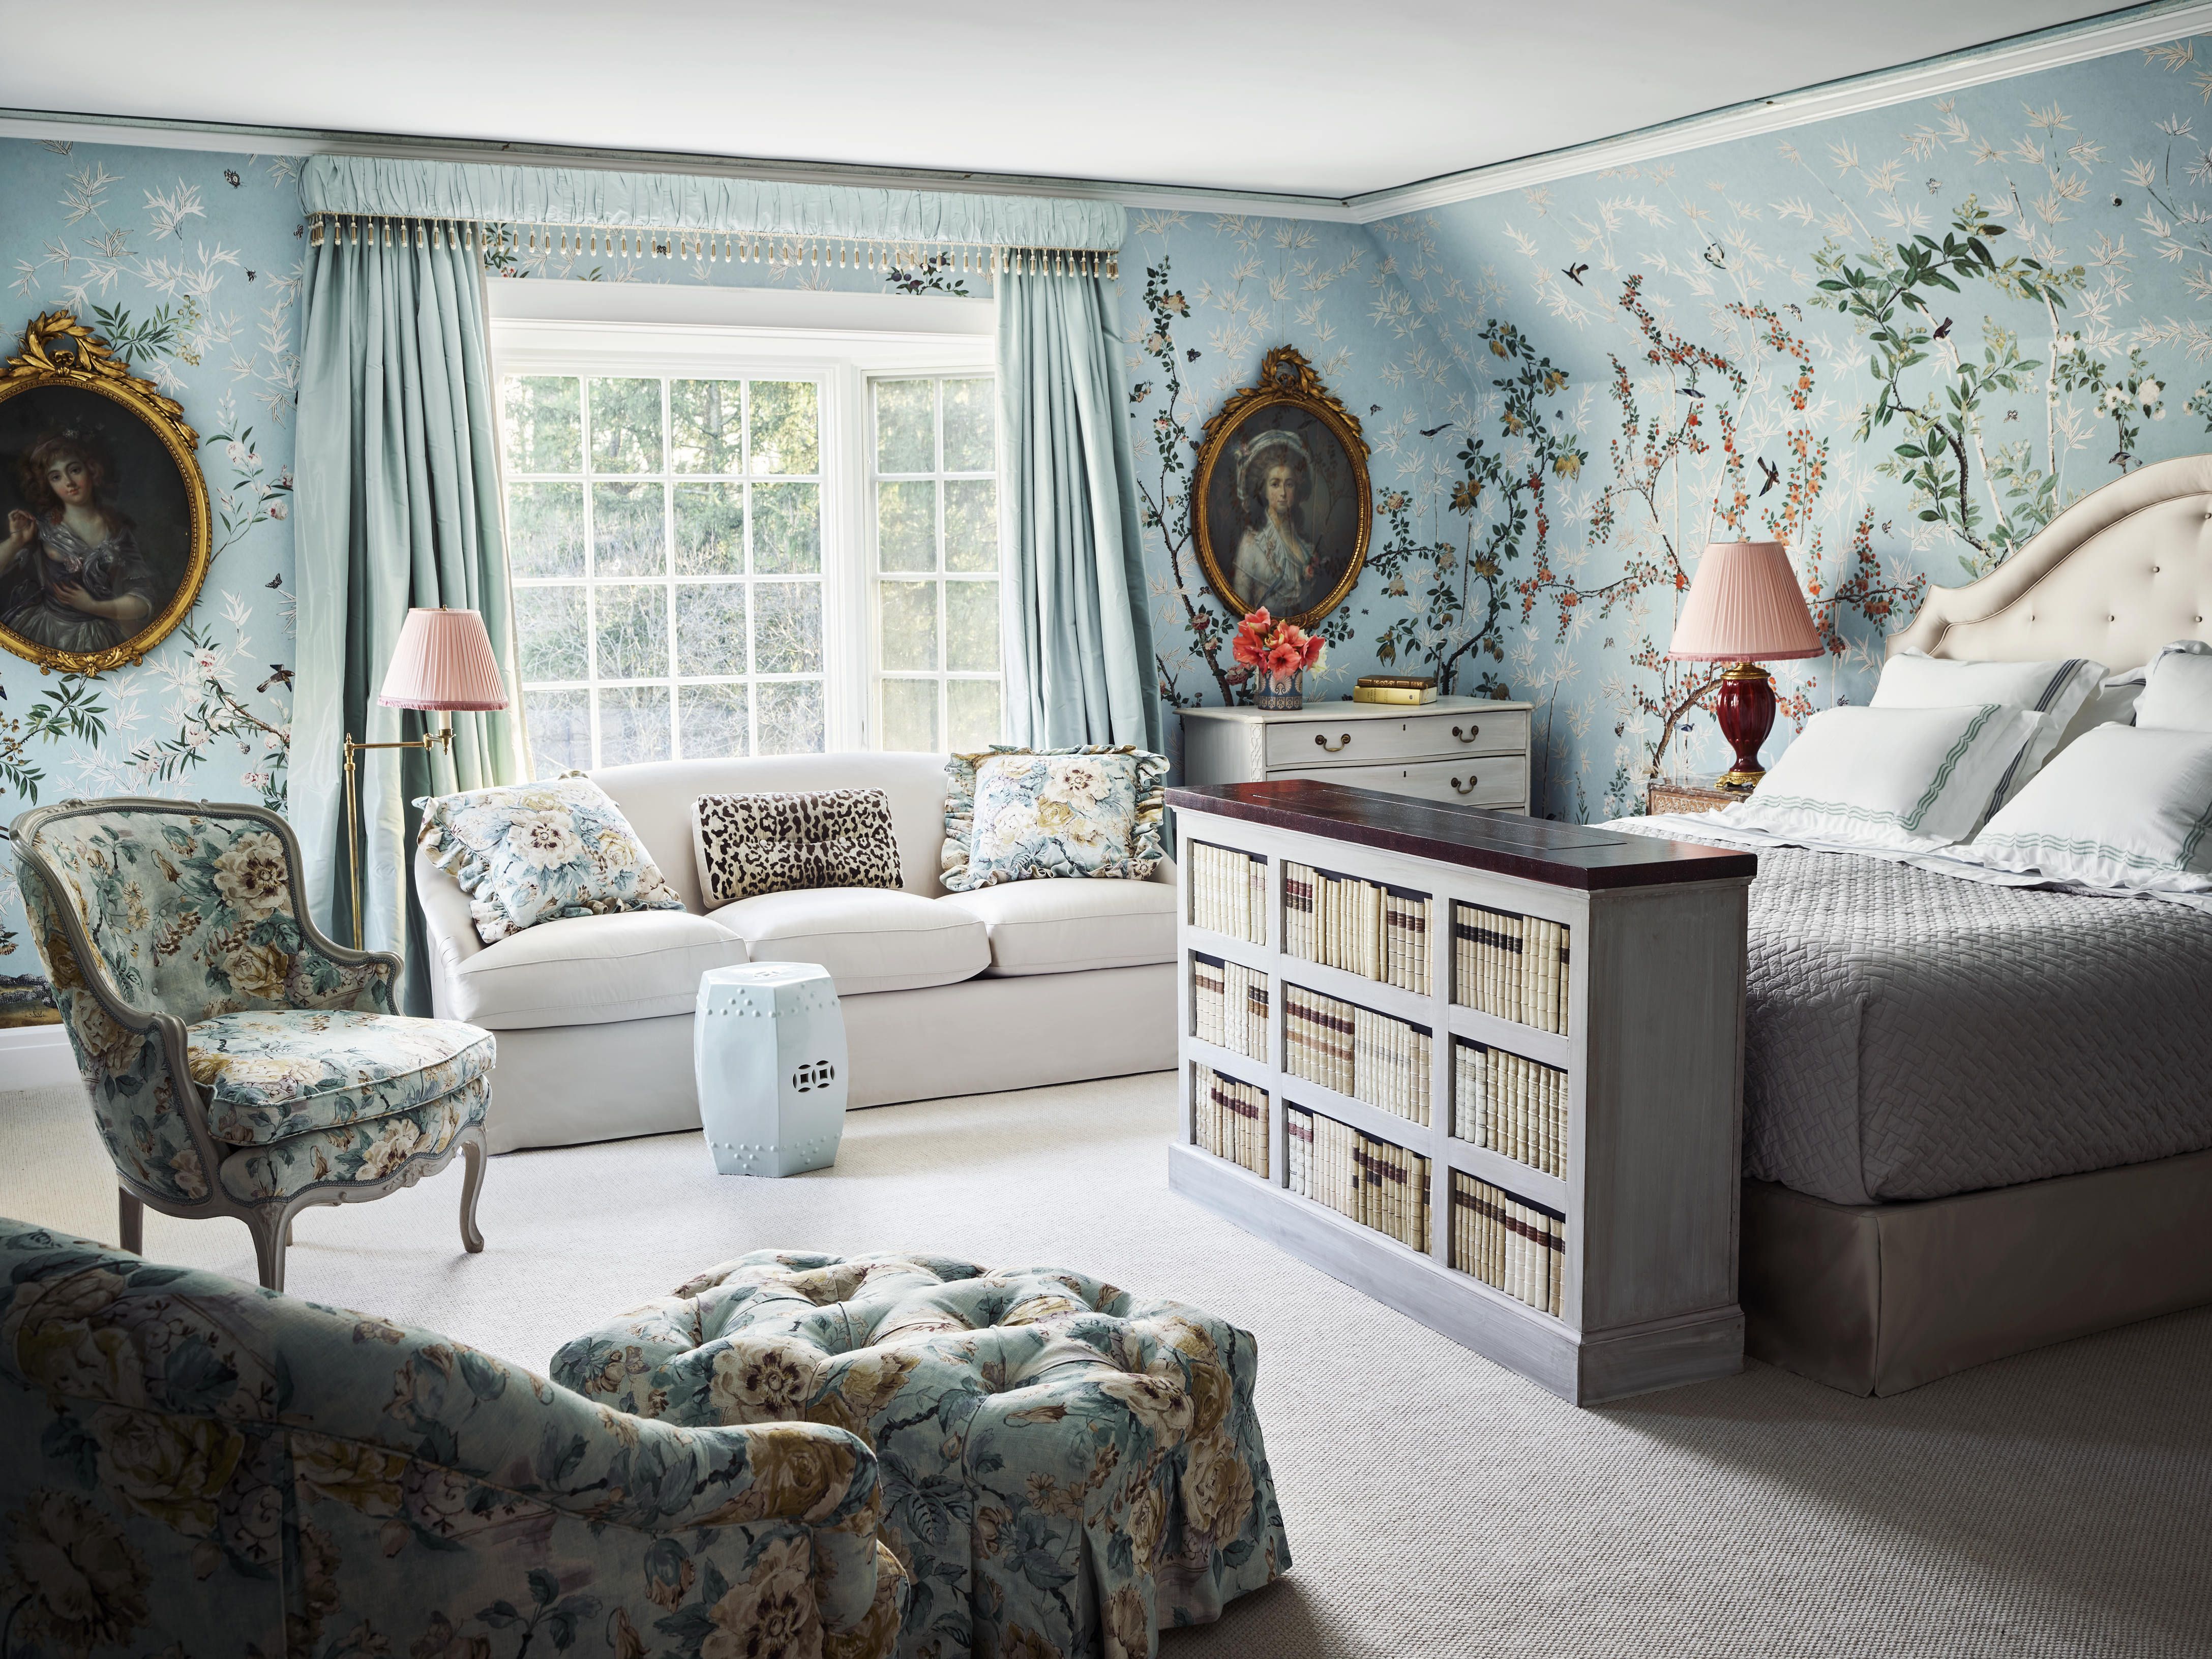 7 William Morris Wallpaper Designs You Need to See! - Posh Pennies